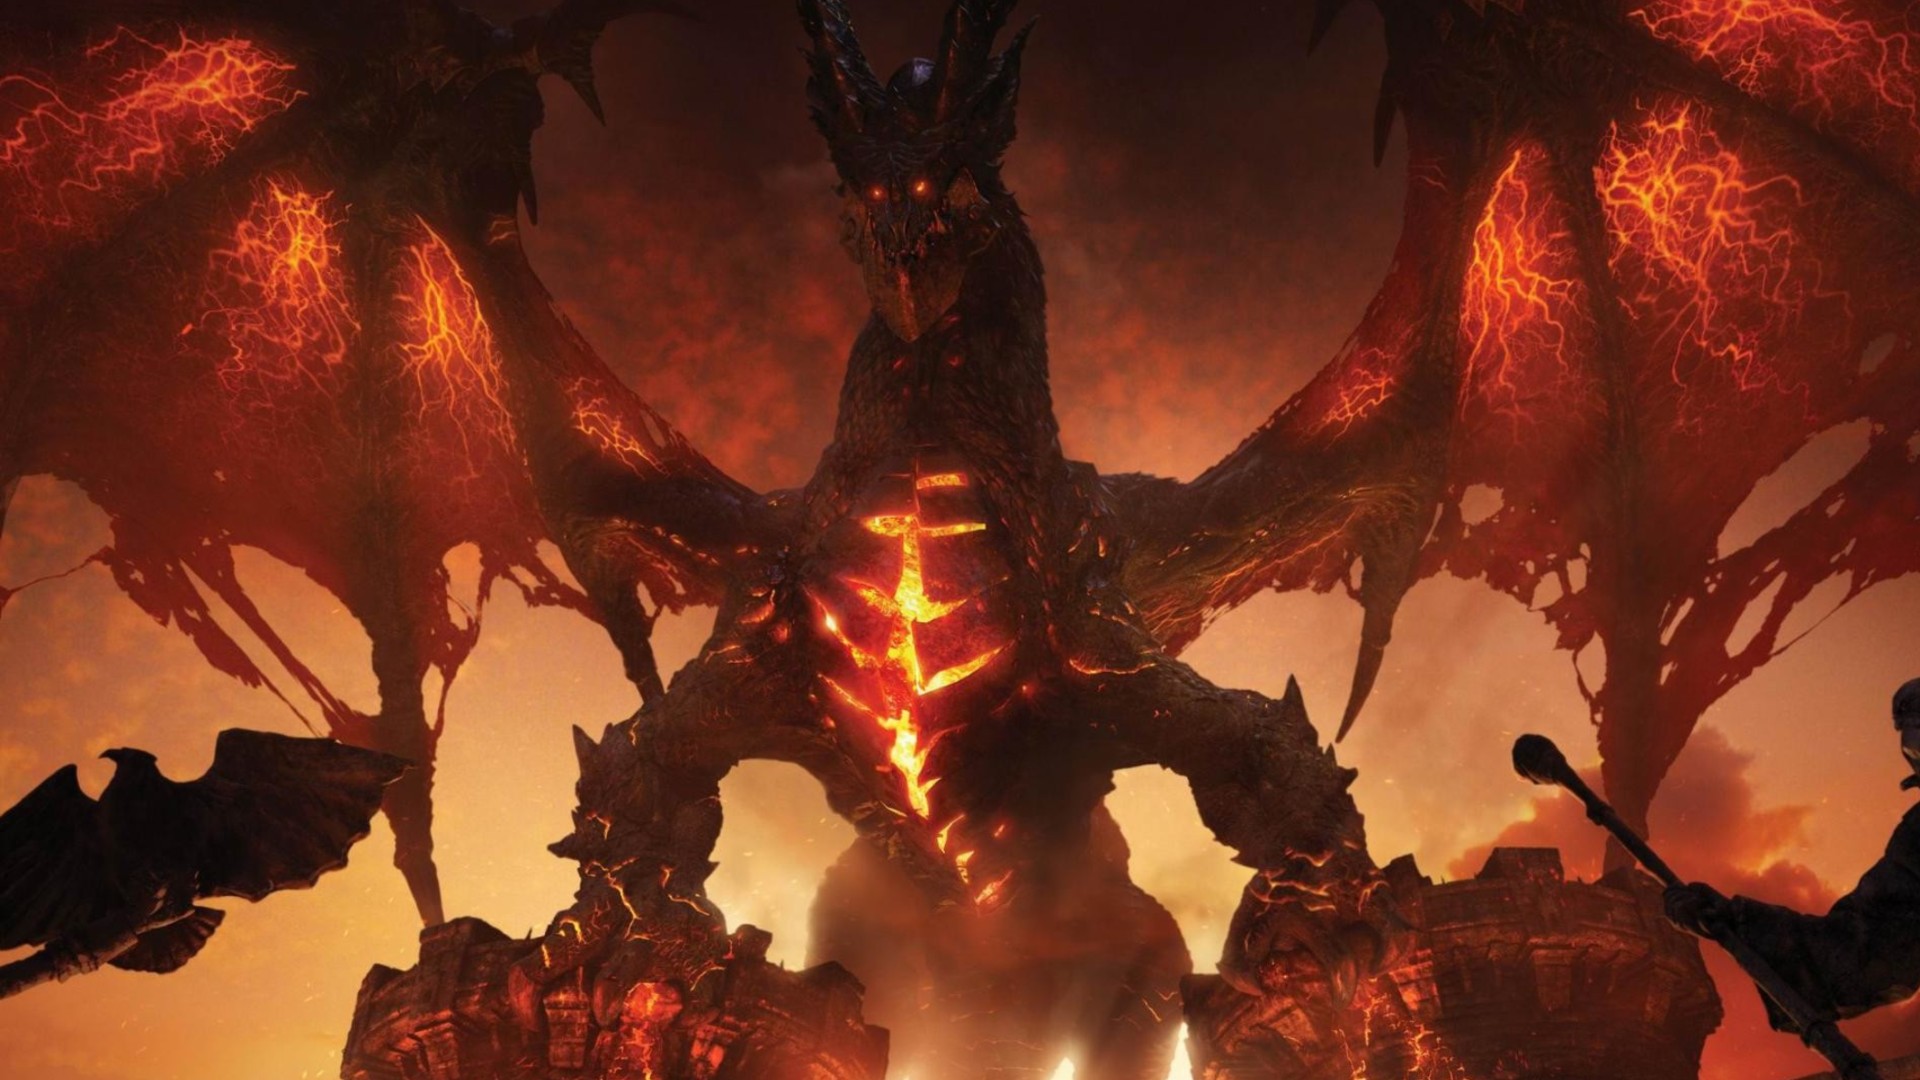 Best dragon games: World of Warcraft. Image shows a large, demonic dragon.